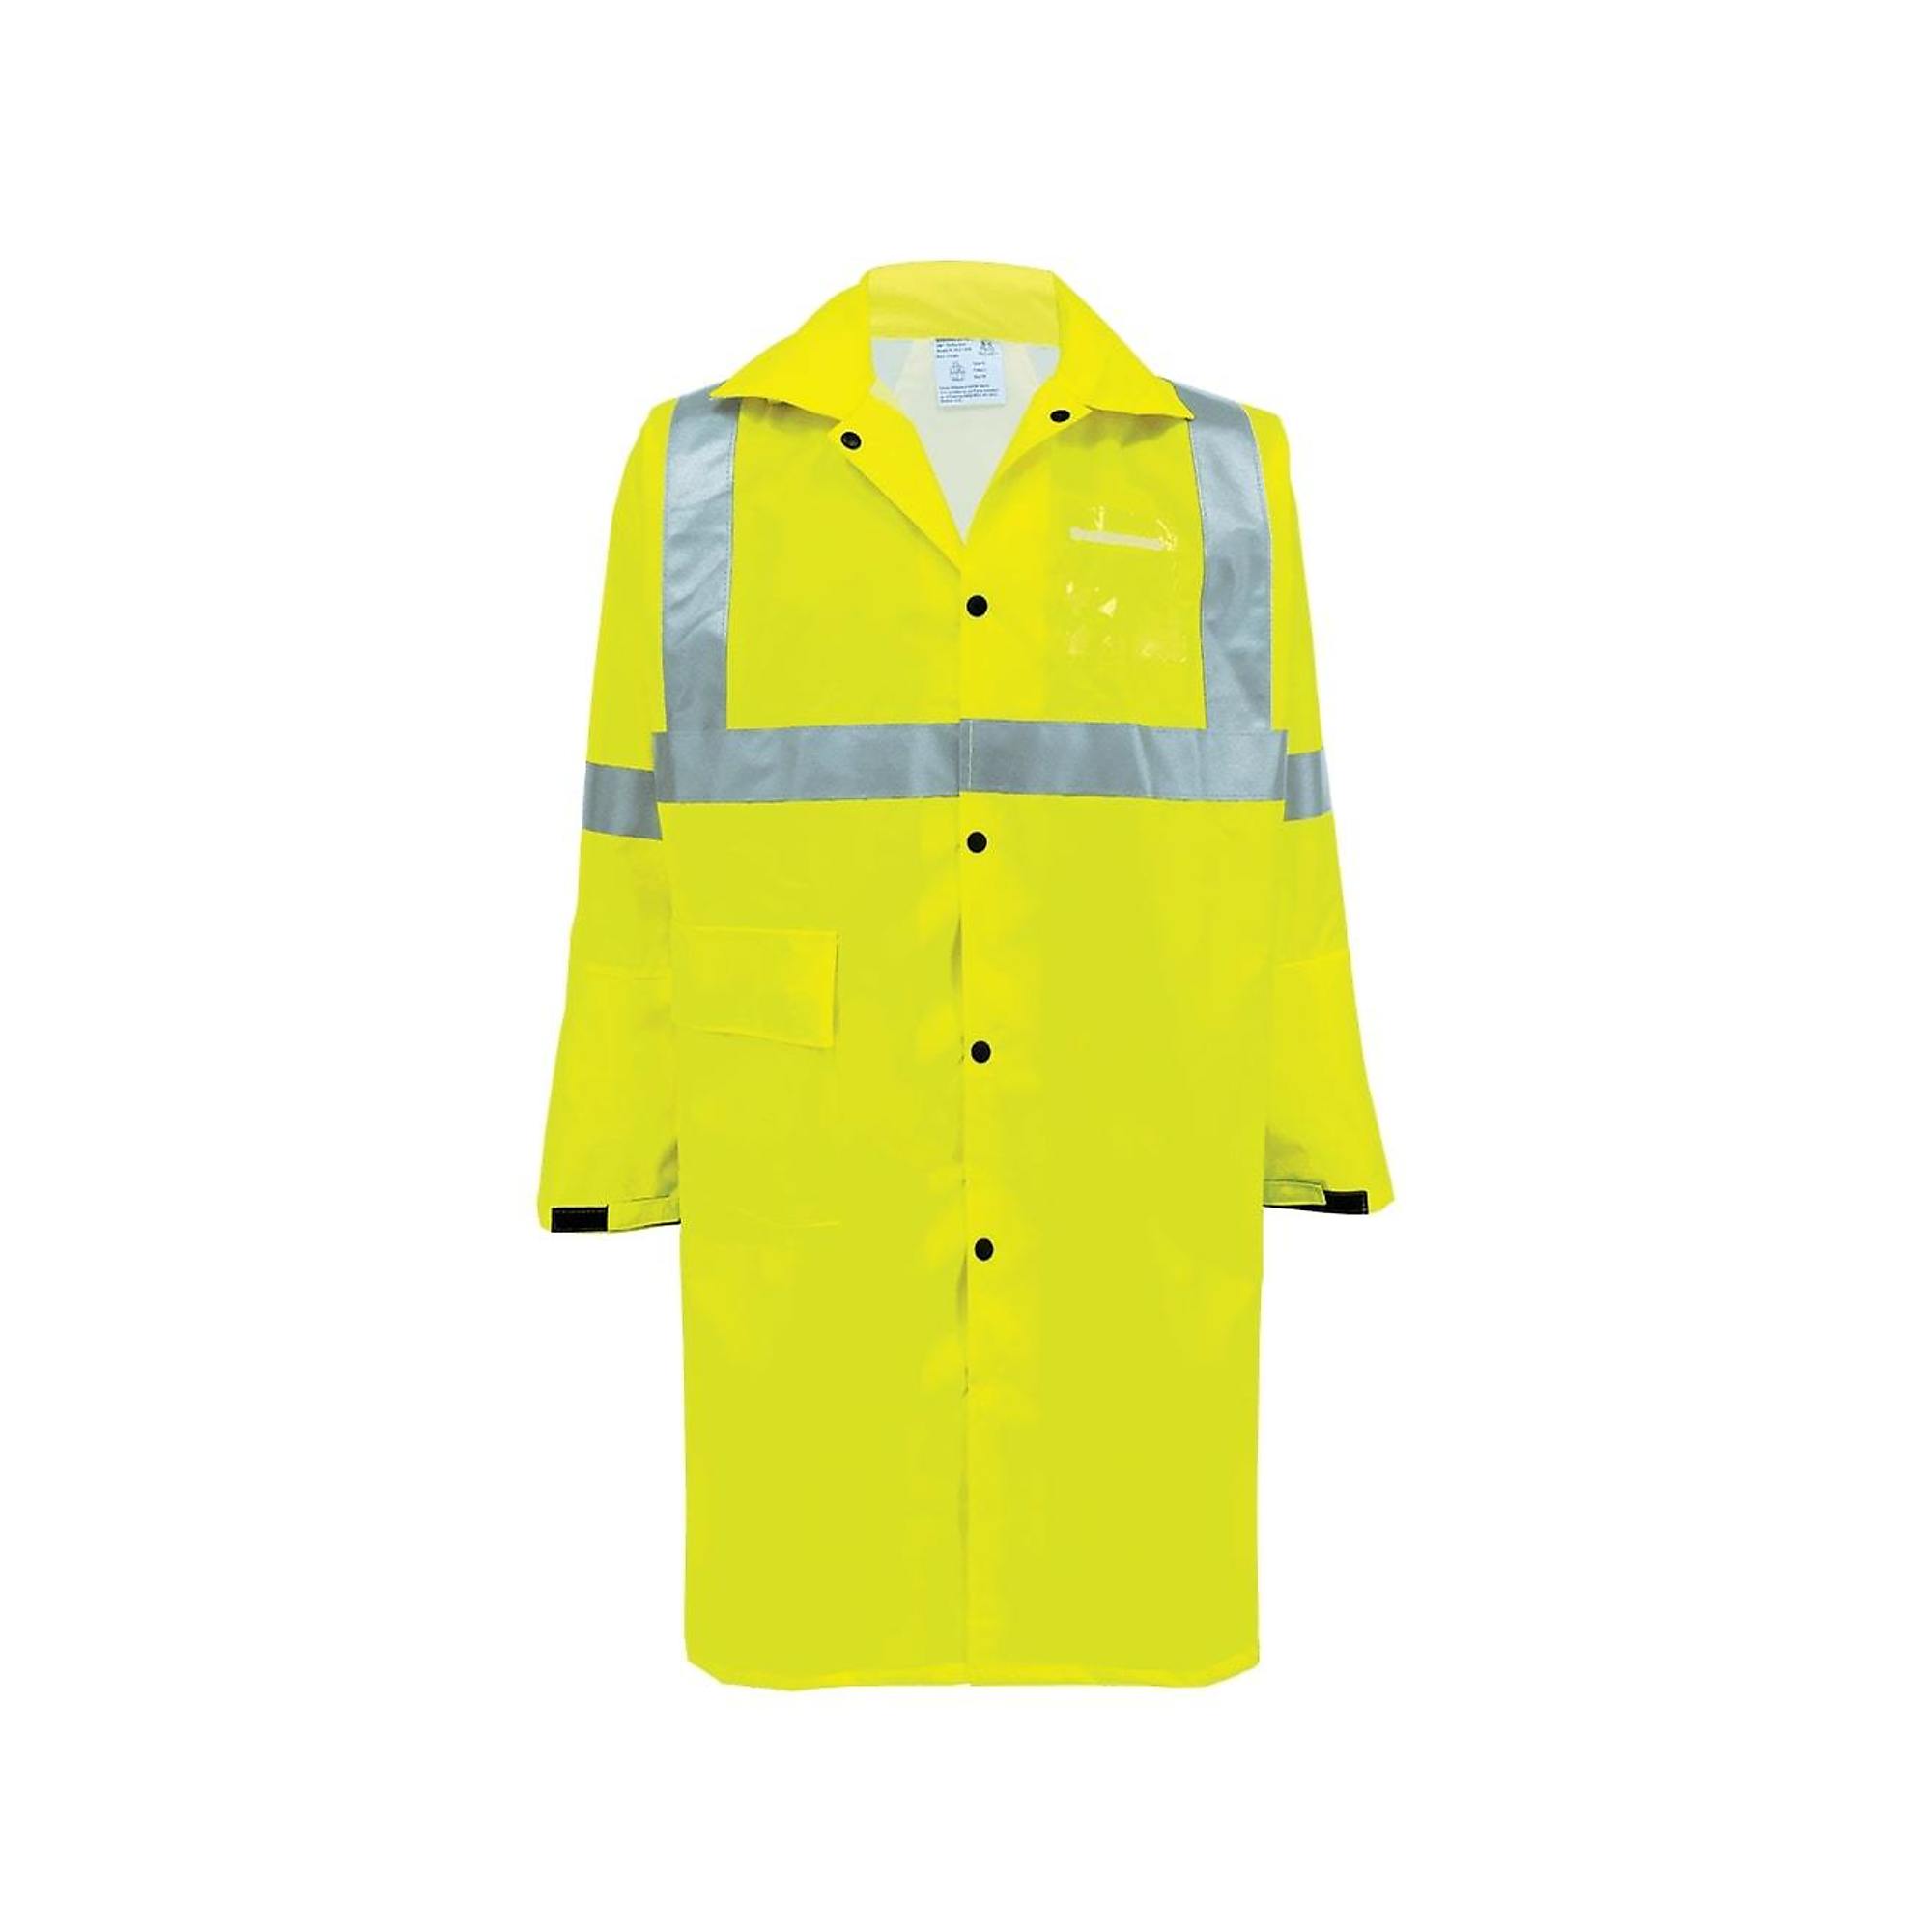 FrogWear, HV Yel/Grn, Class 3 Self-Extinguish, 1 Pocket Duster Jacket, Size 4XL, Color High-Visibility Yellow/Green, Model GLO-1450-4XL